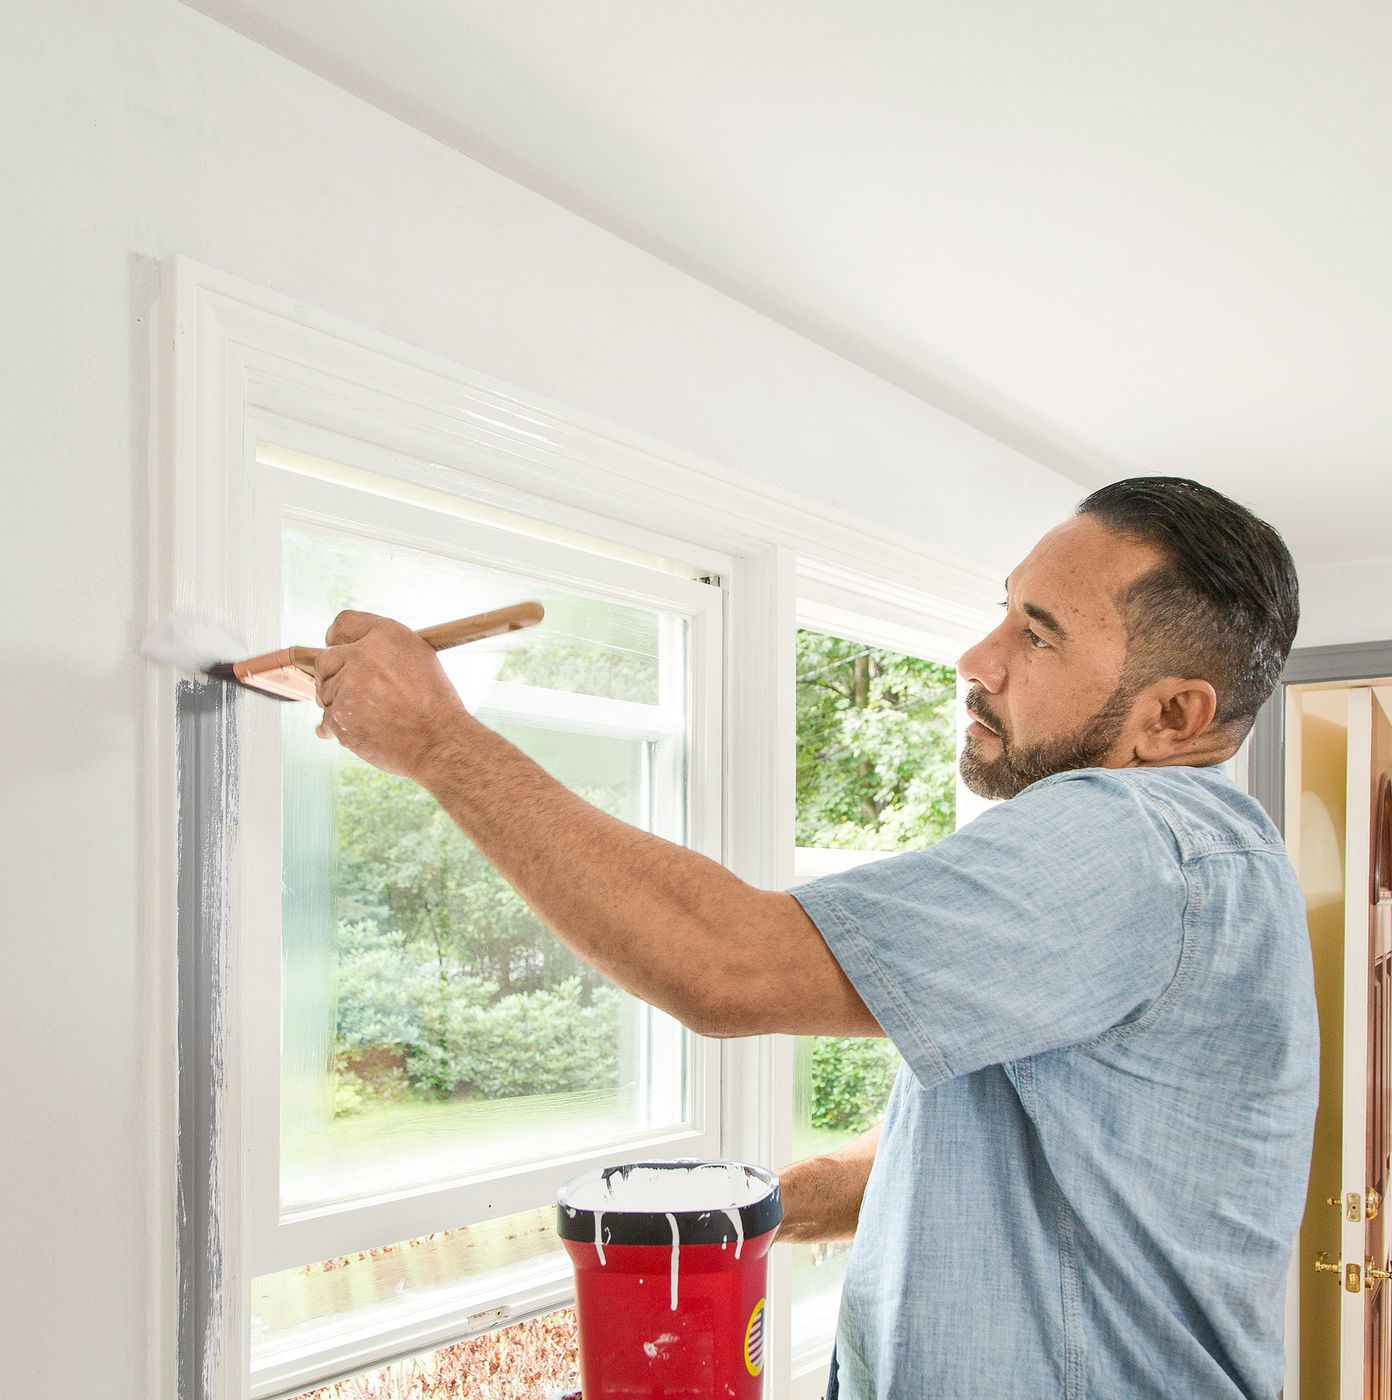 The Best Way On Painting Window Frames You Should Know | Roy Home Design